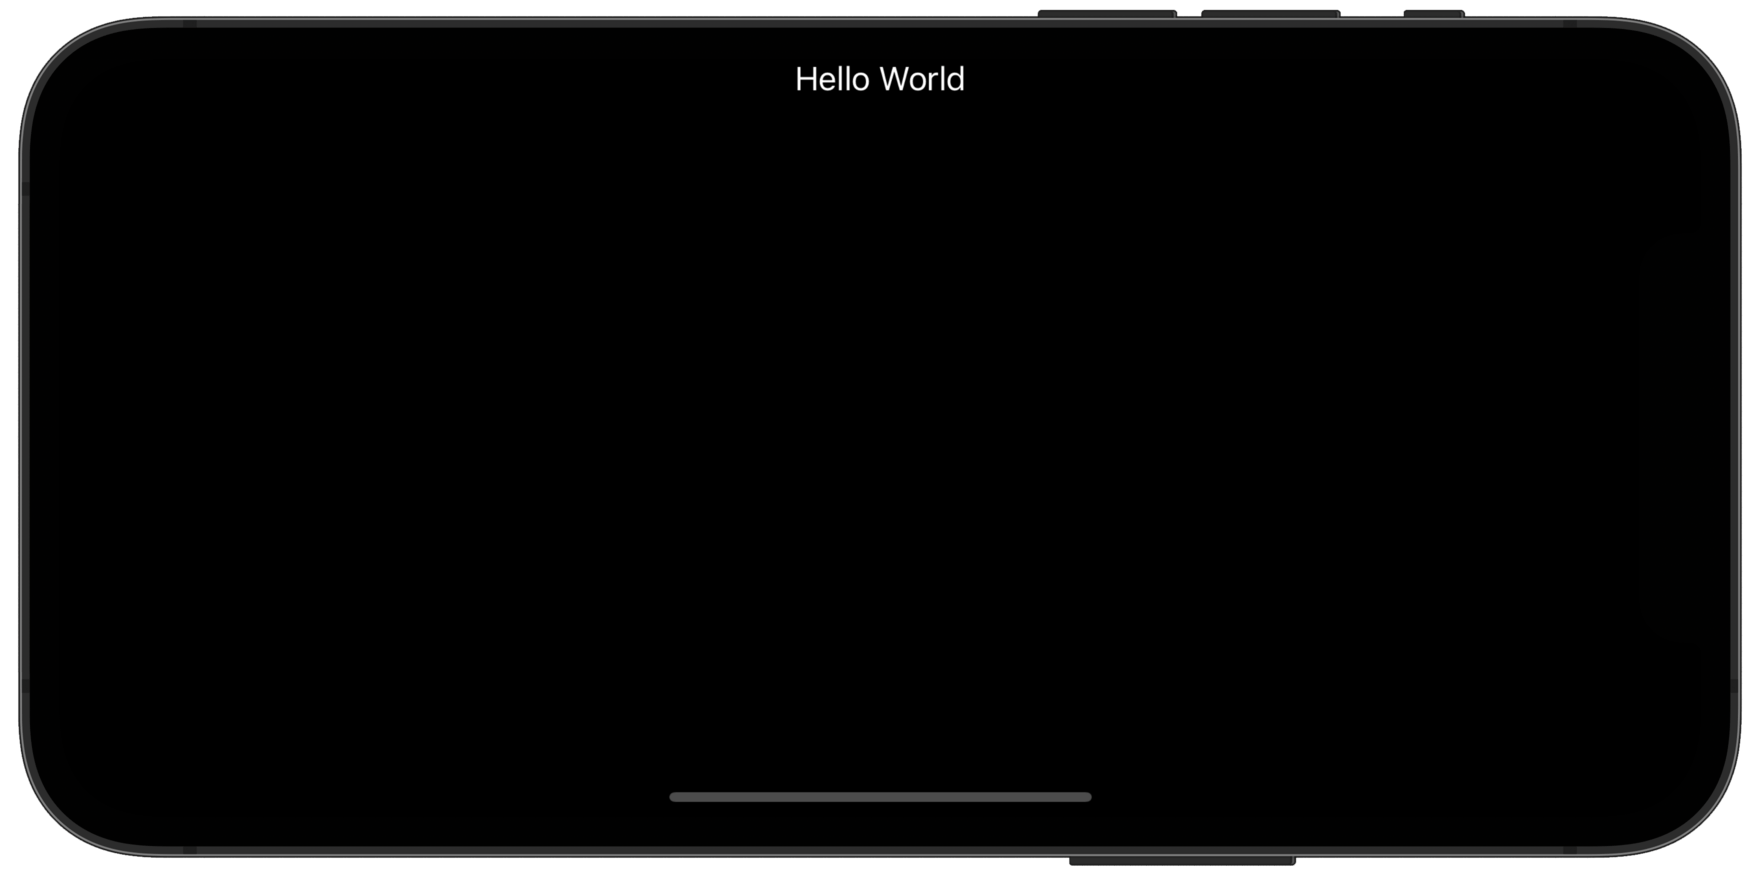 A phone with the text “Hello World” at the top of the screen.